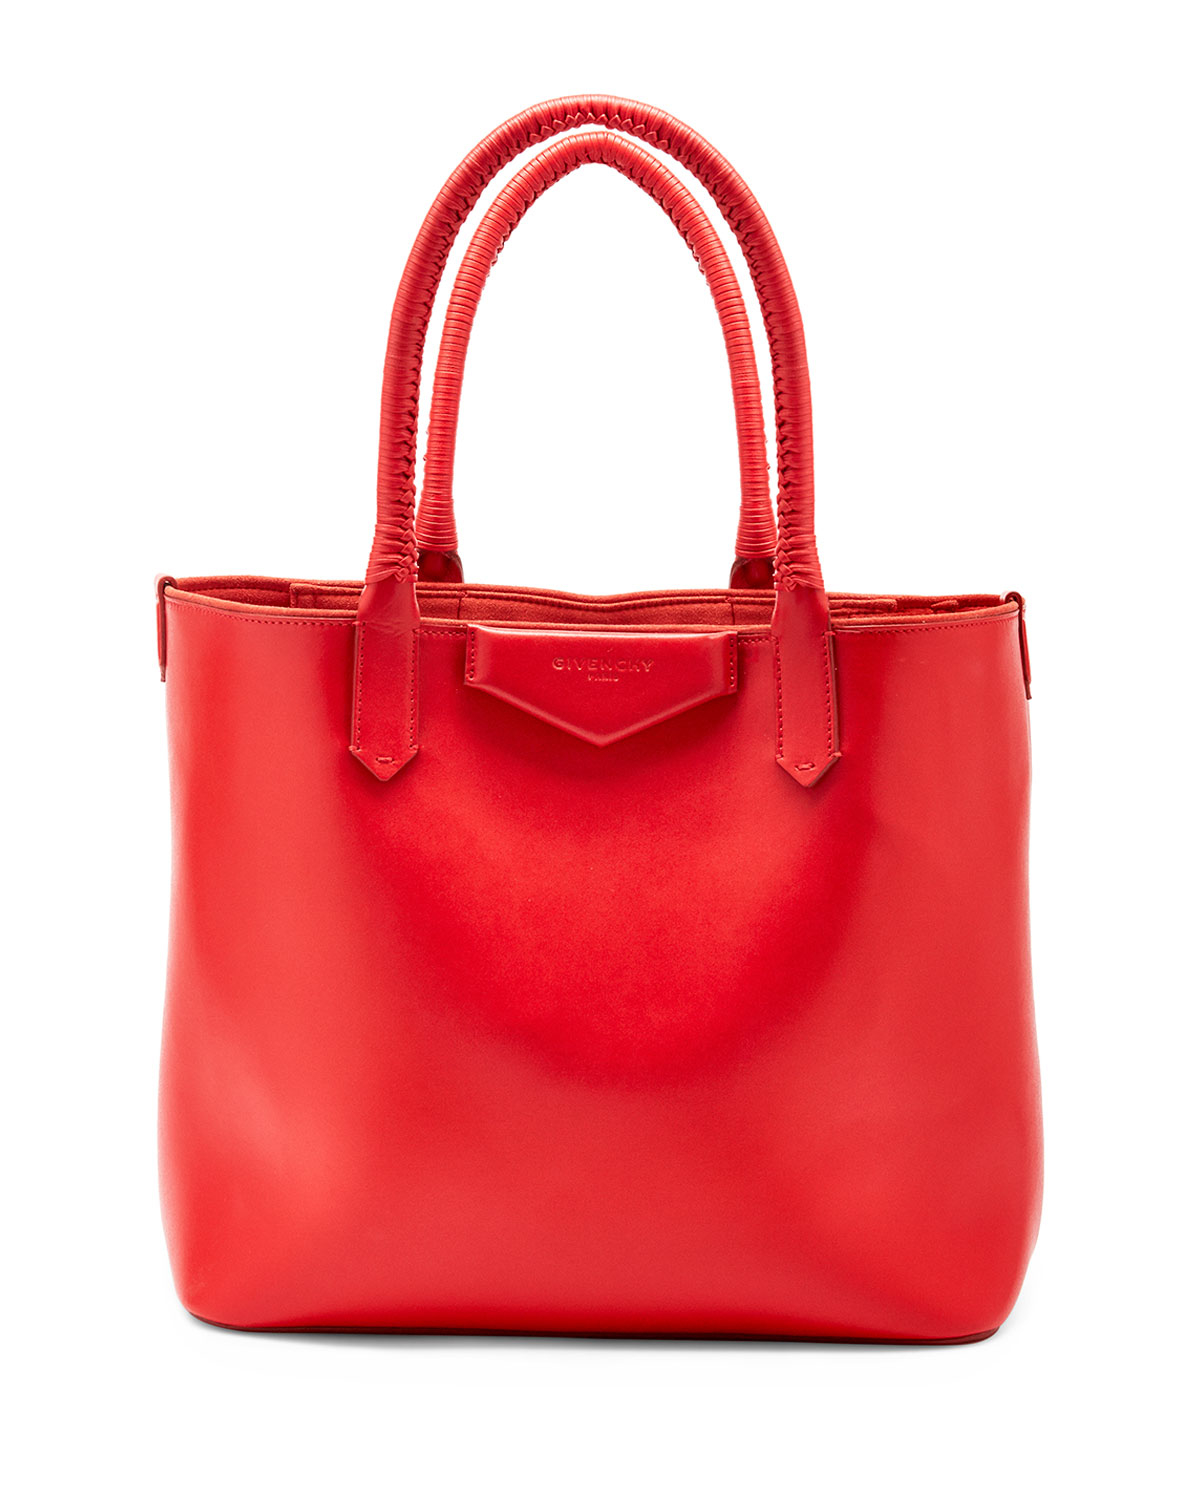 Givenchy Antigona Whipstitch-handle Tote Bag in Red | Lyst